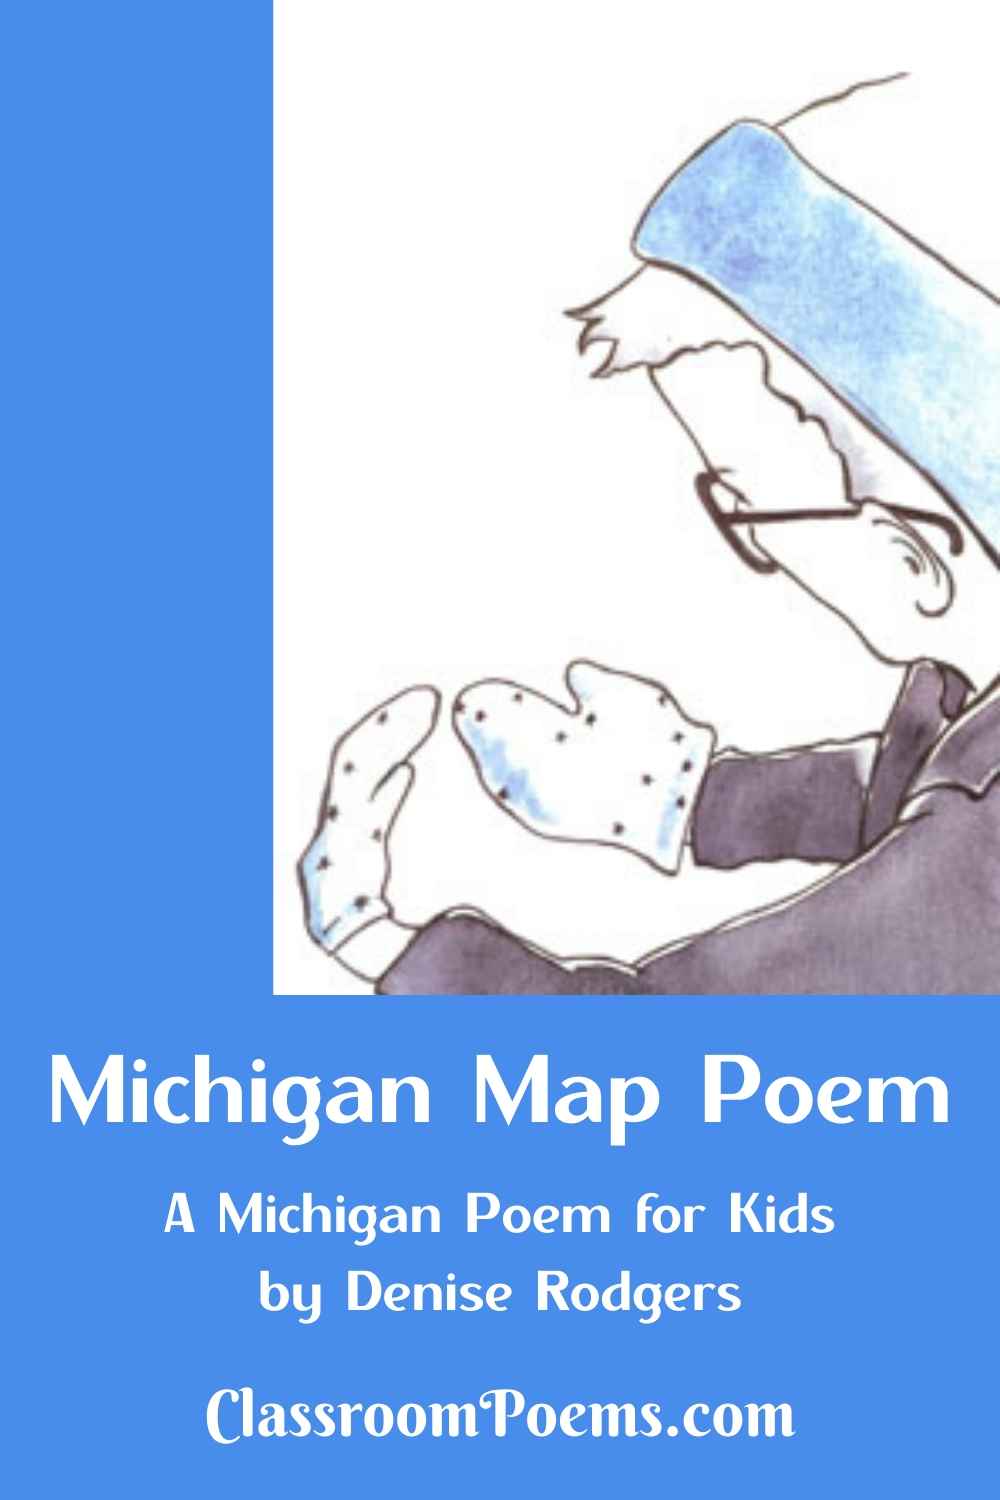 Boy with mittens. MICHIGAN MAP POEM by Denise Rodgers on ClassroomPoems.com.